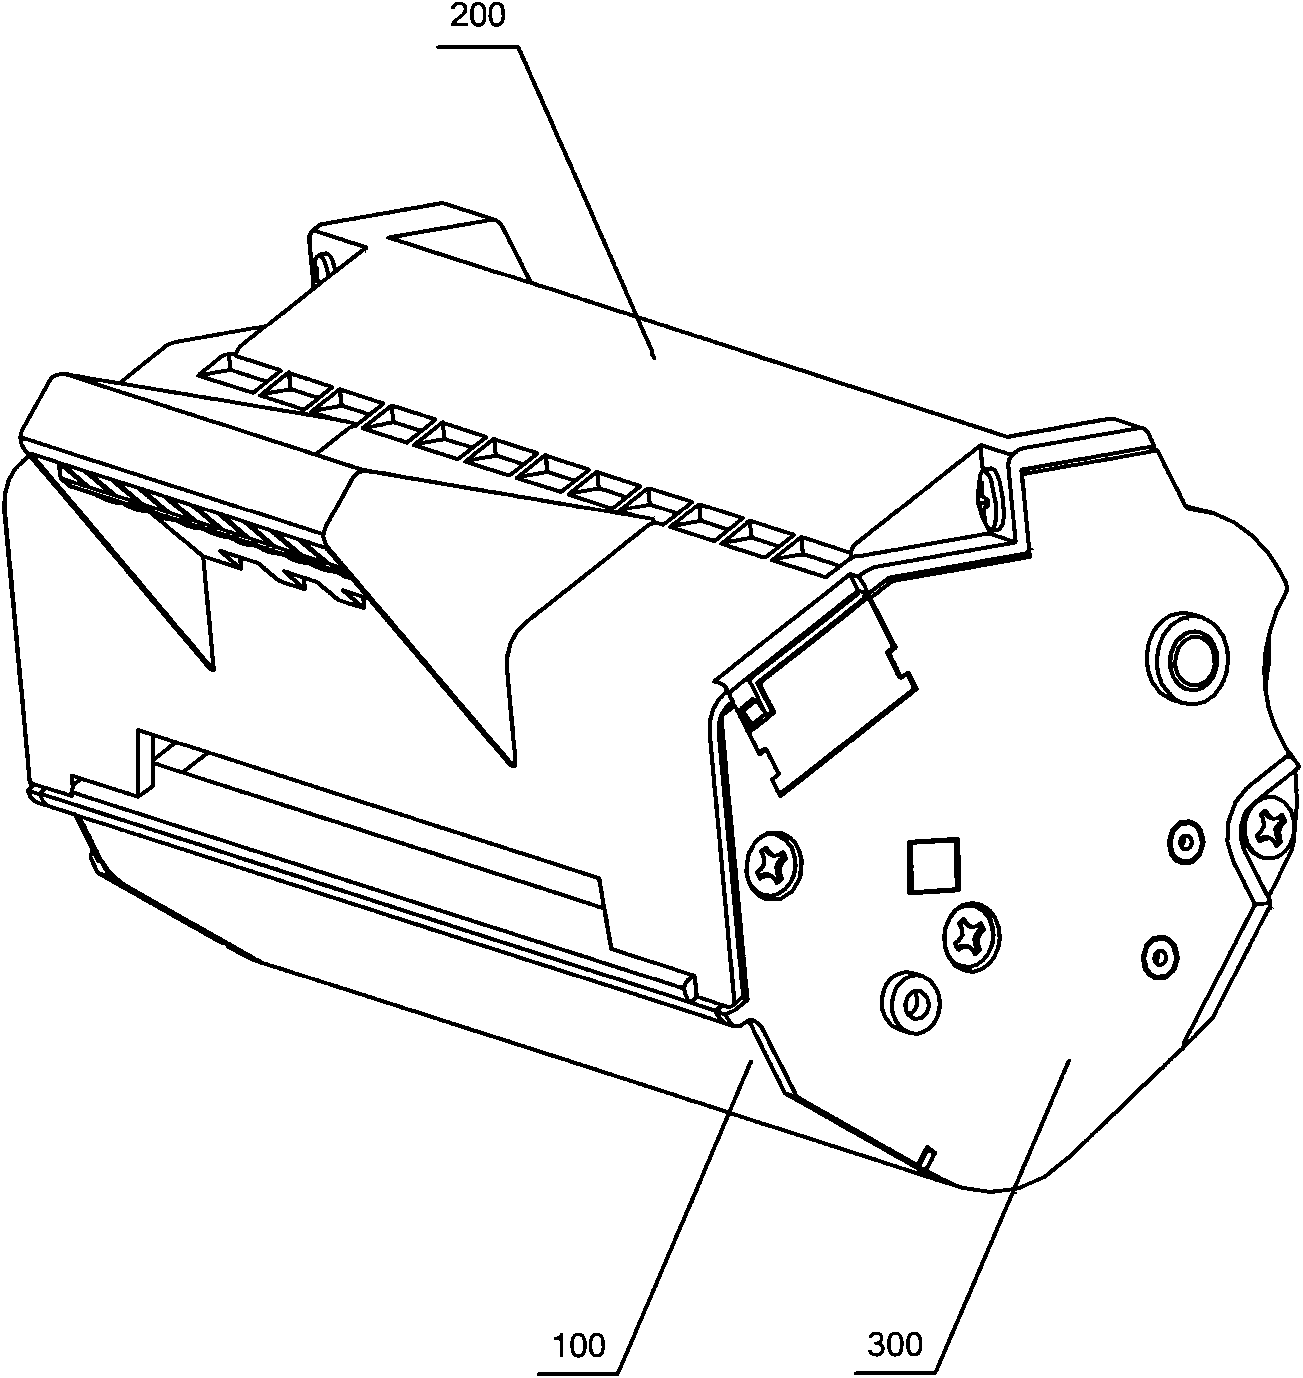 Processing box and imaging device